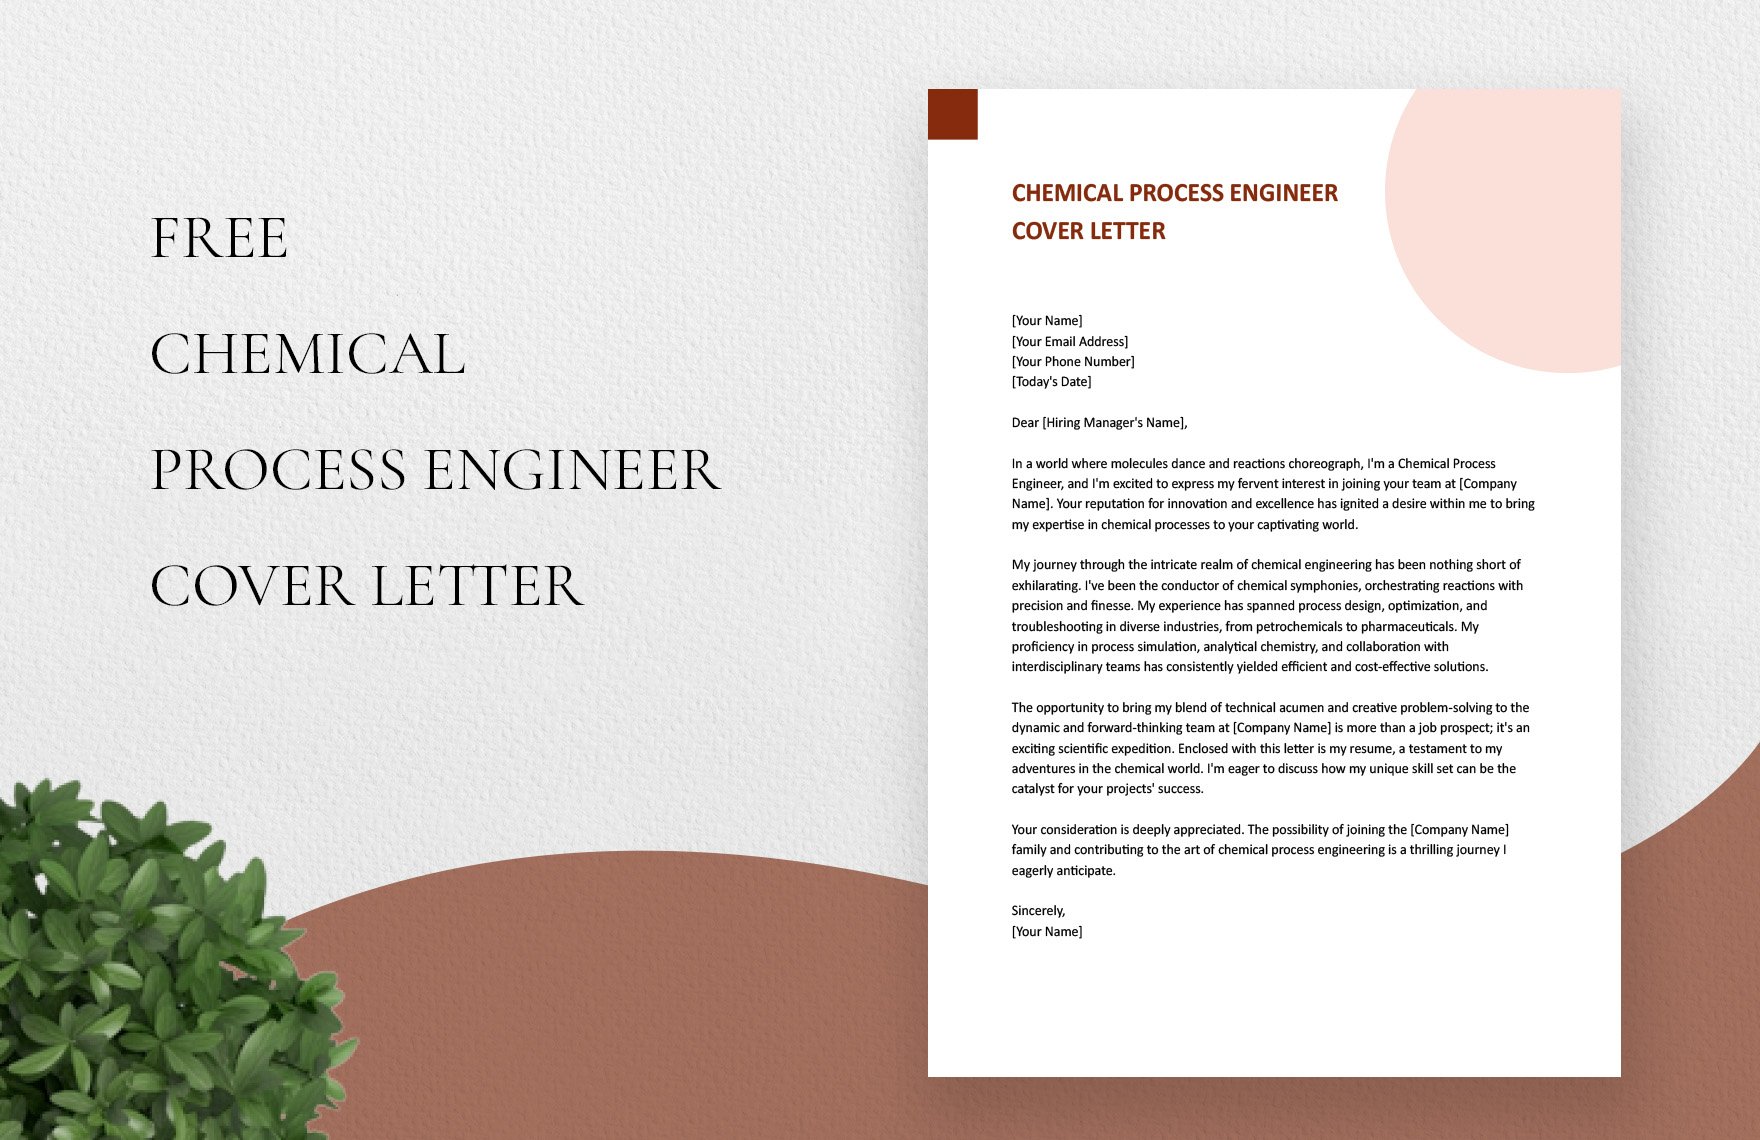 Chemical Process Engineer Cover Letter